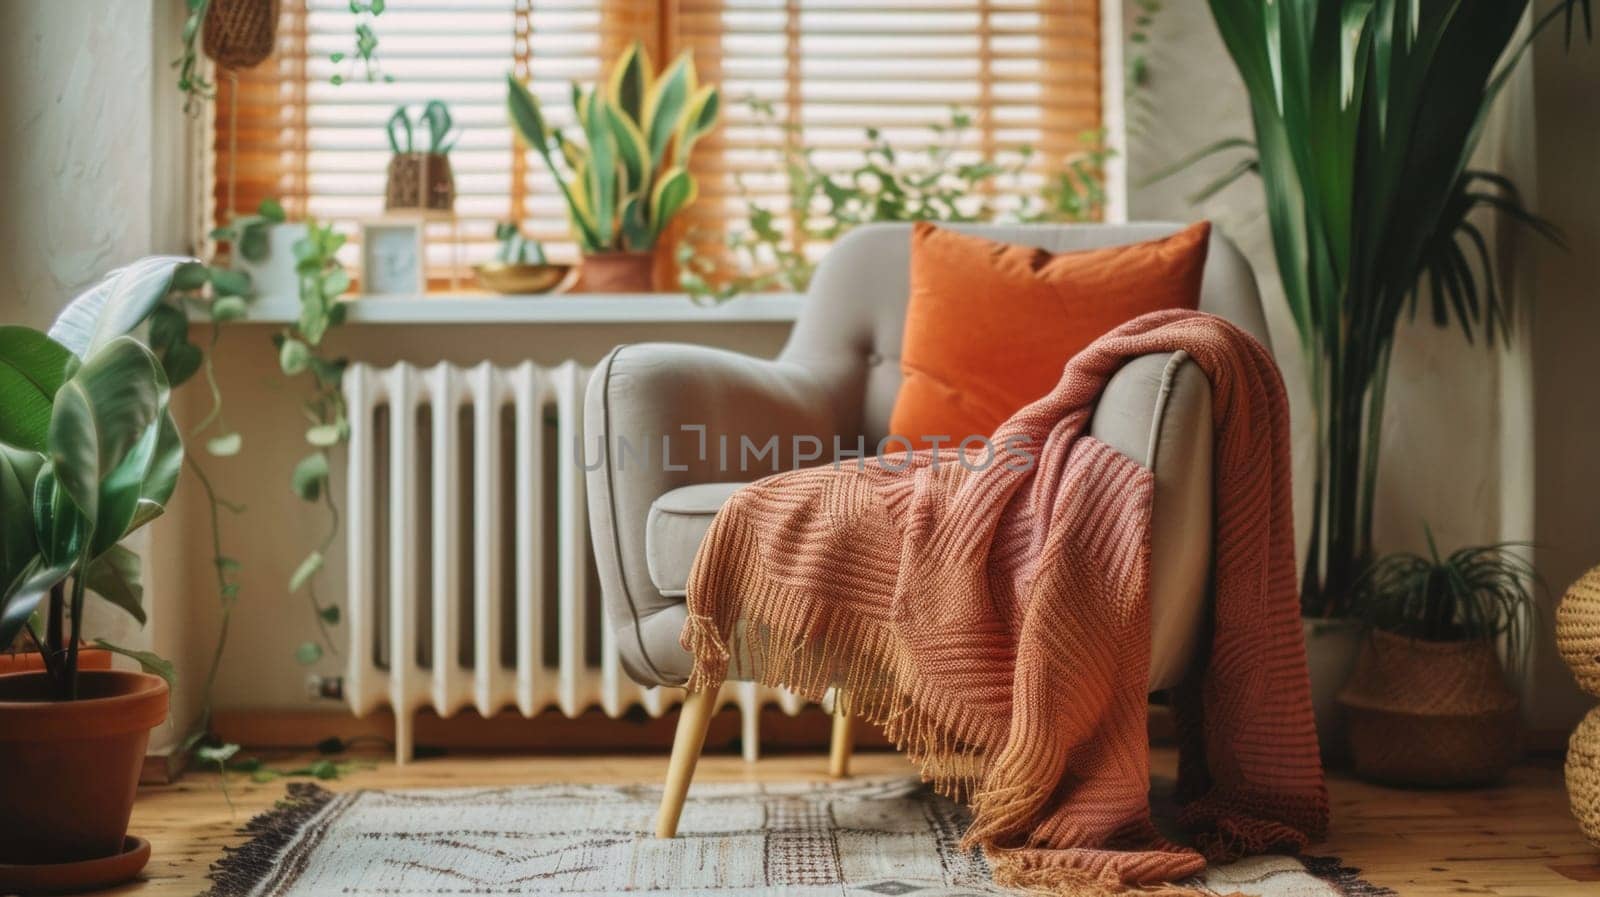 A chair with a blanket on it sitting in front of some plants, AI by starush